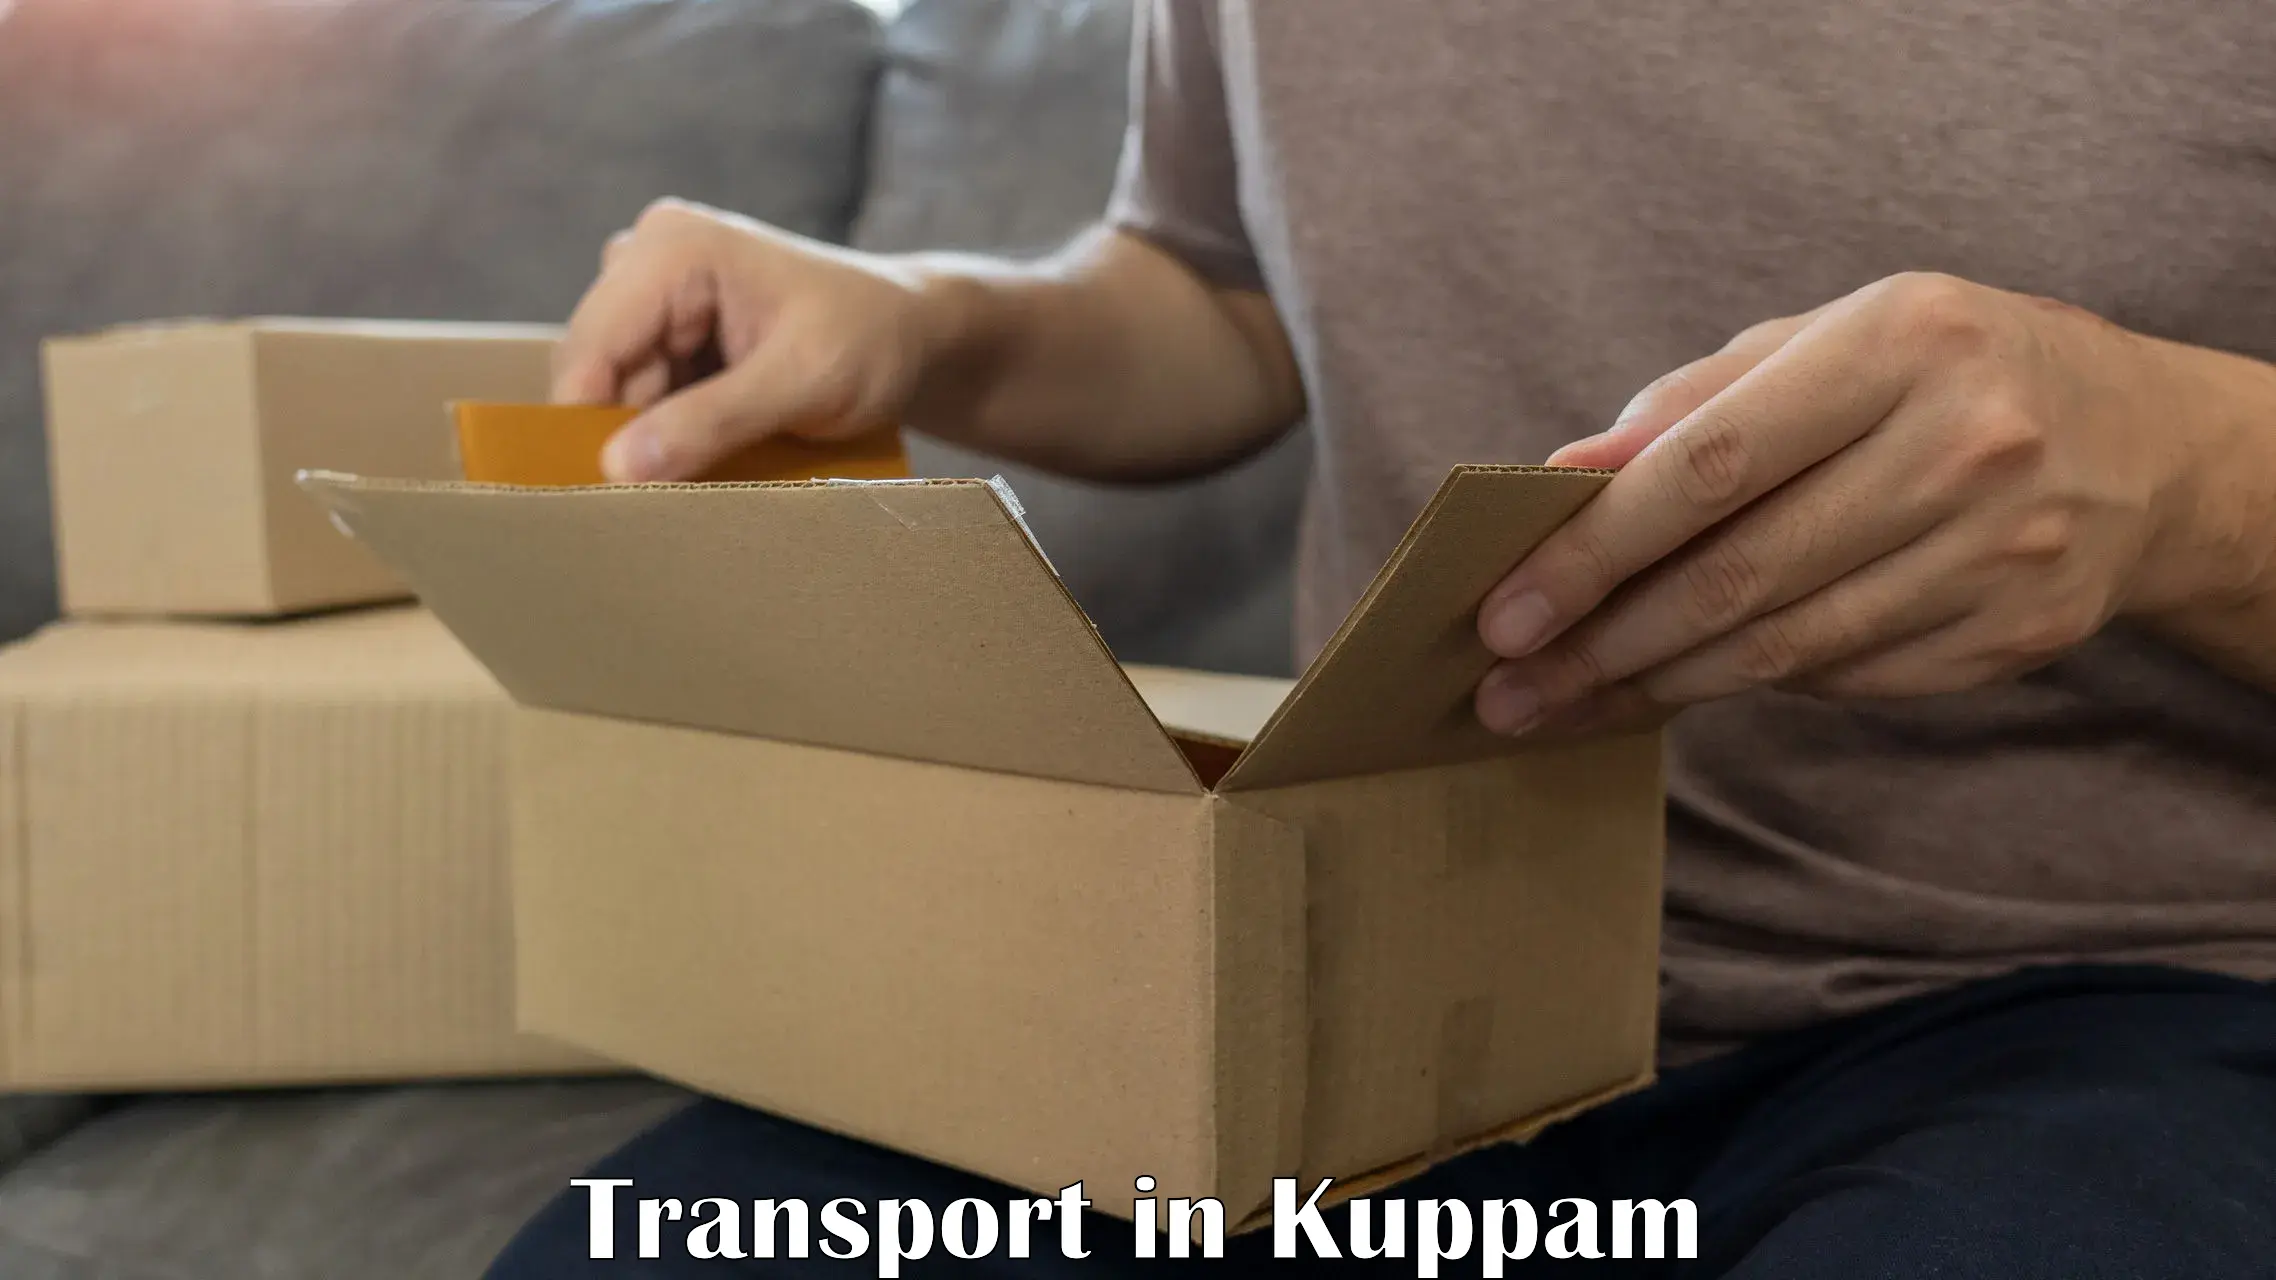 Shipping services in Kuppam